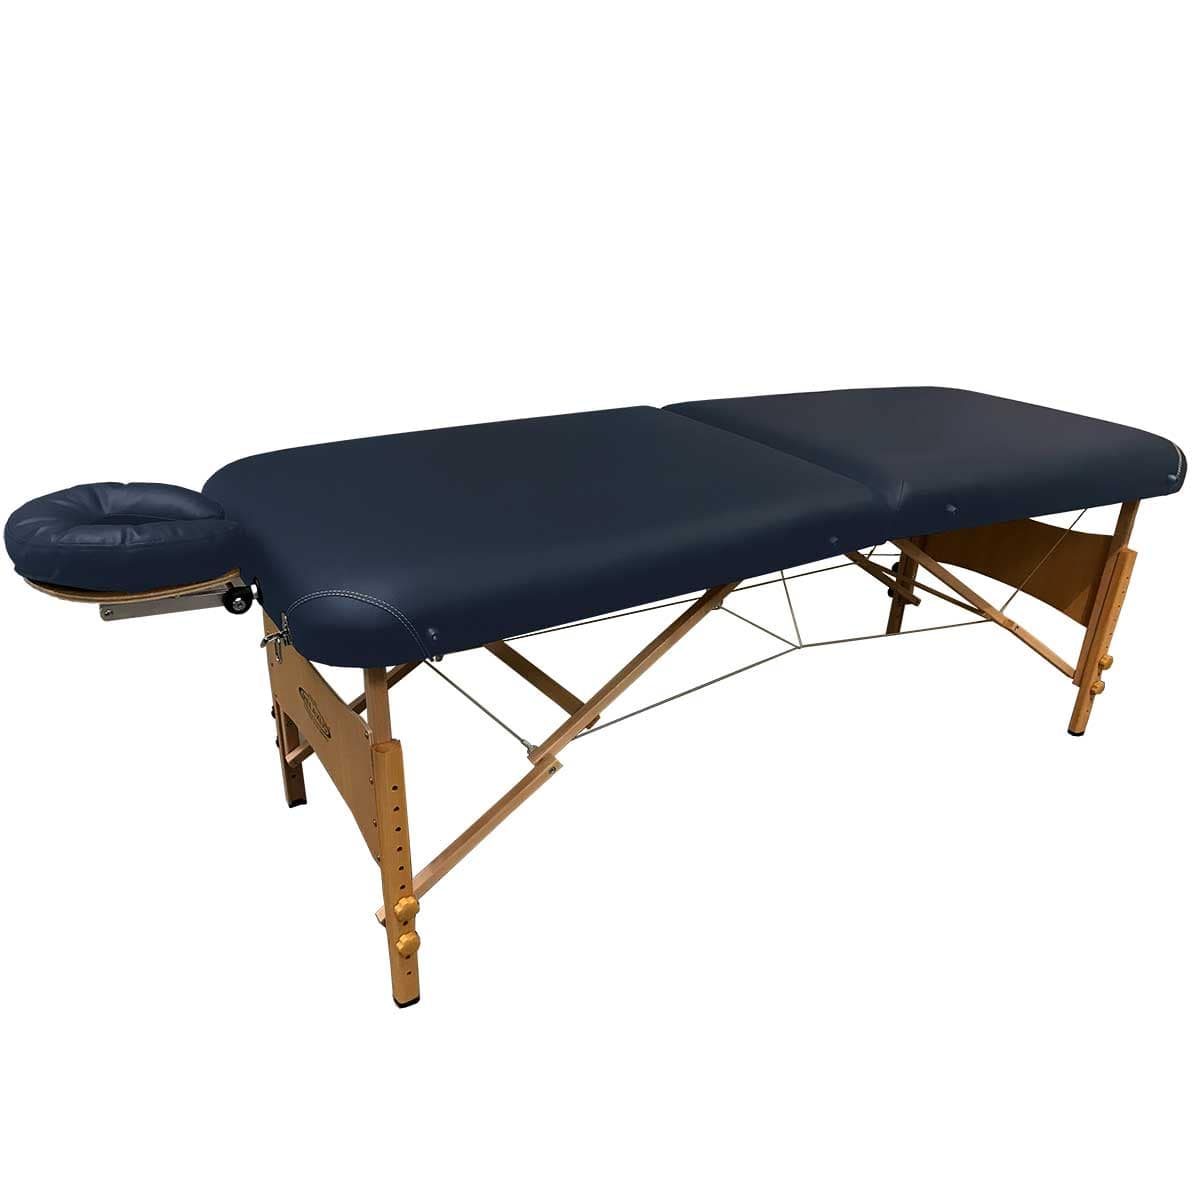 Prolite Deluxe Massage Table Package